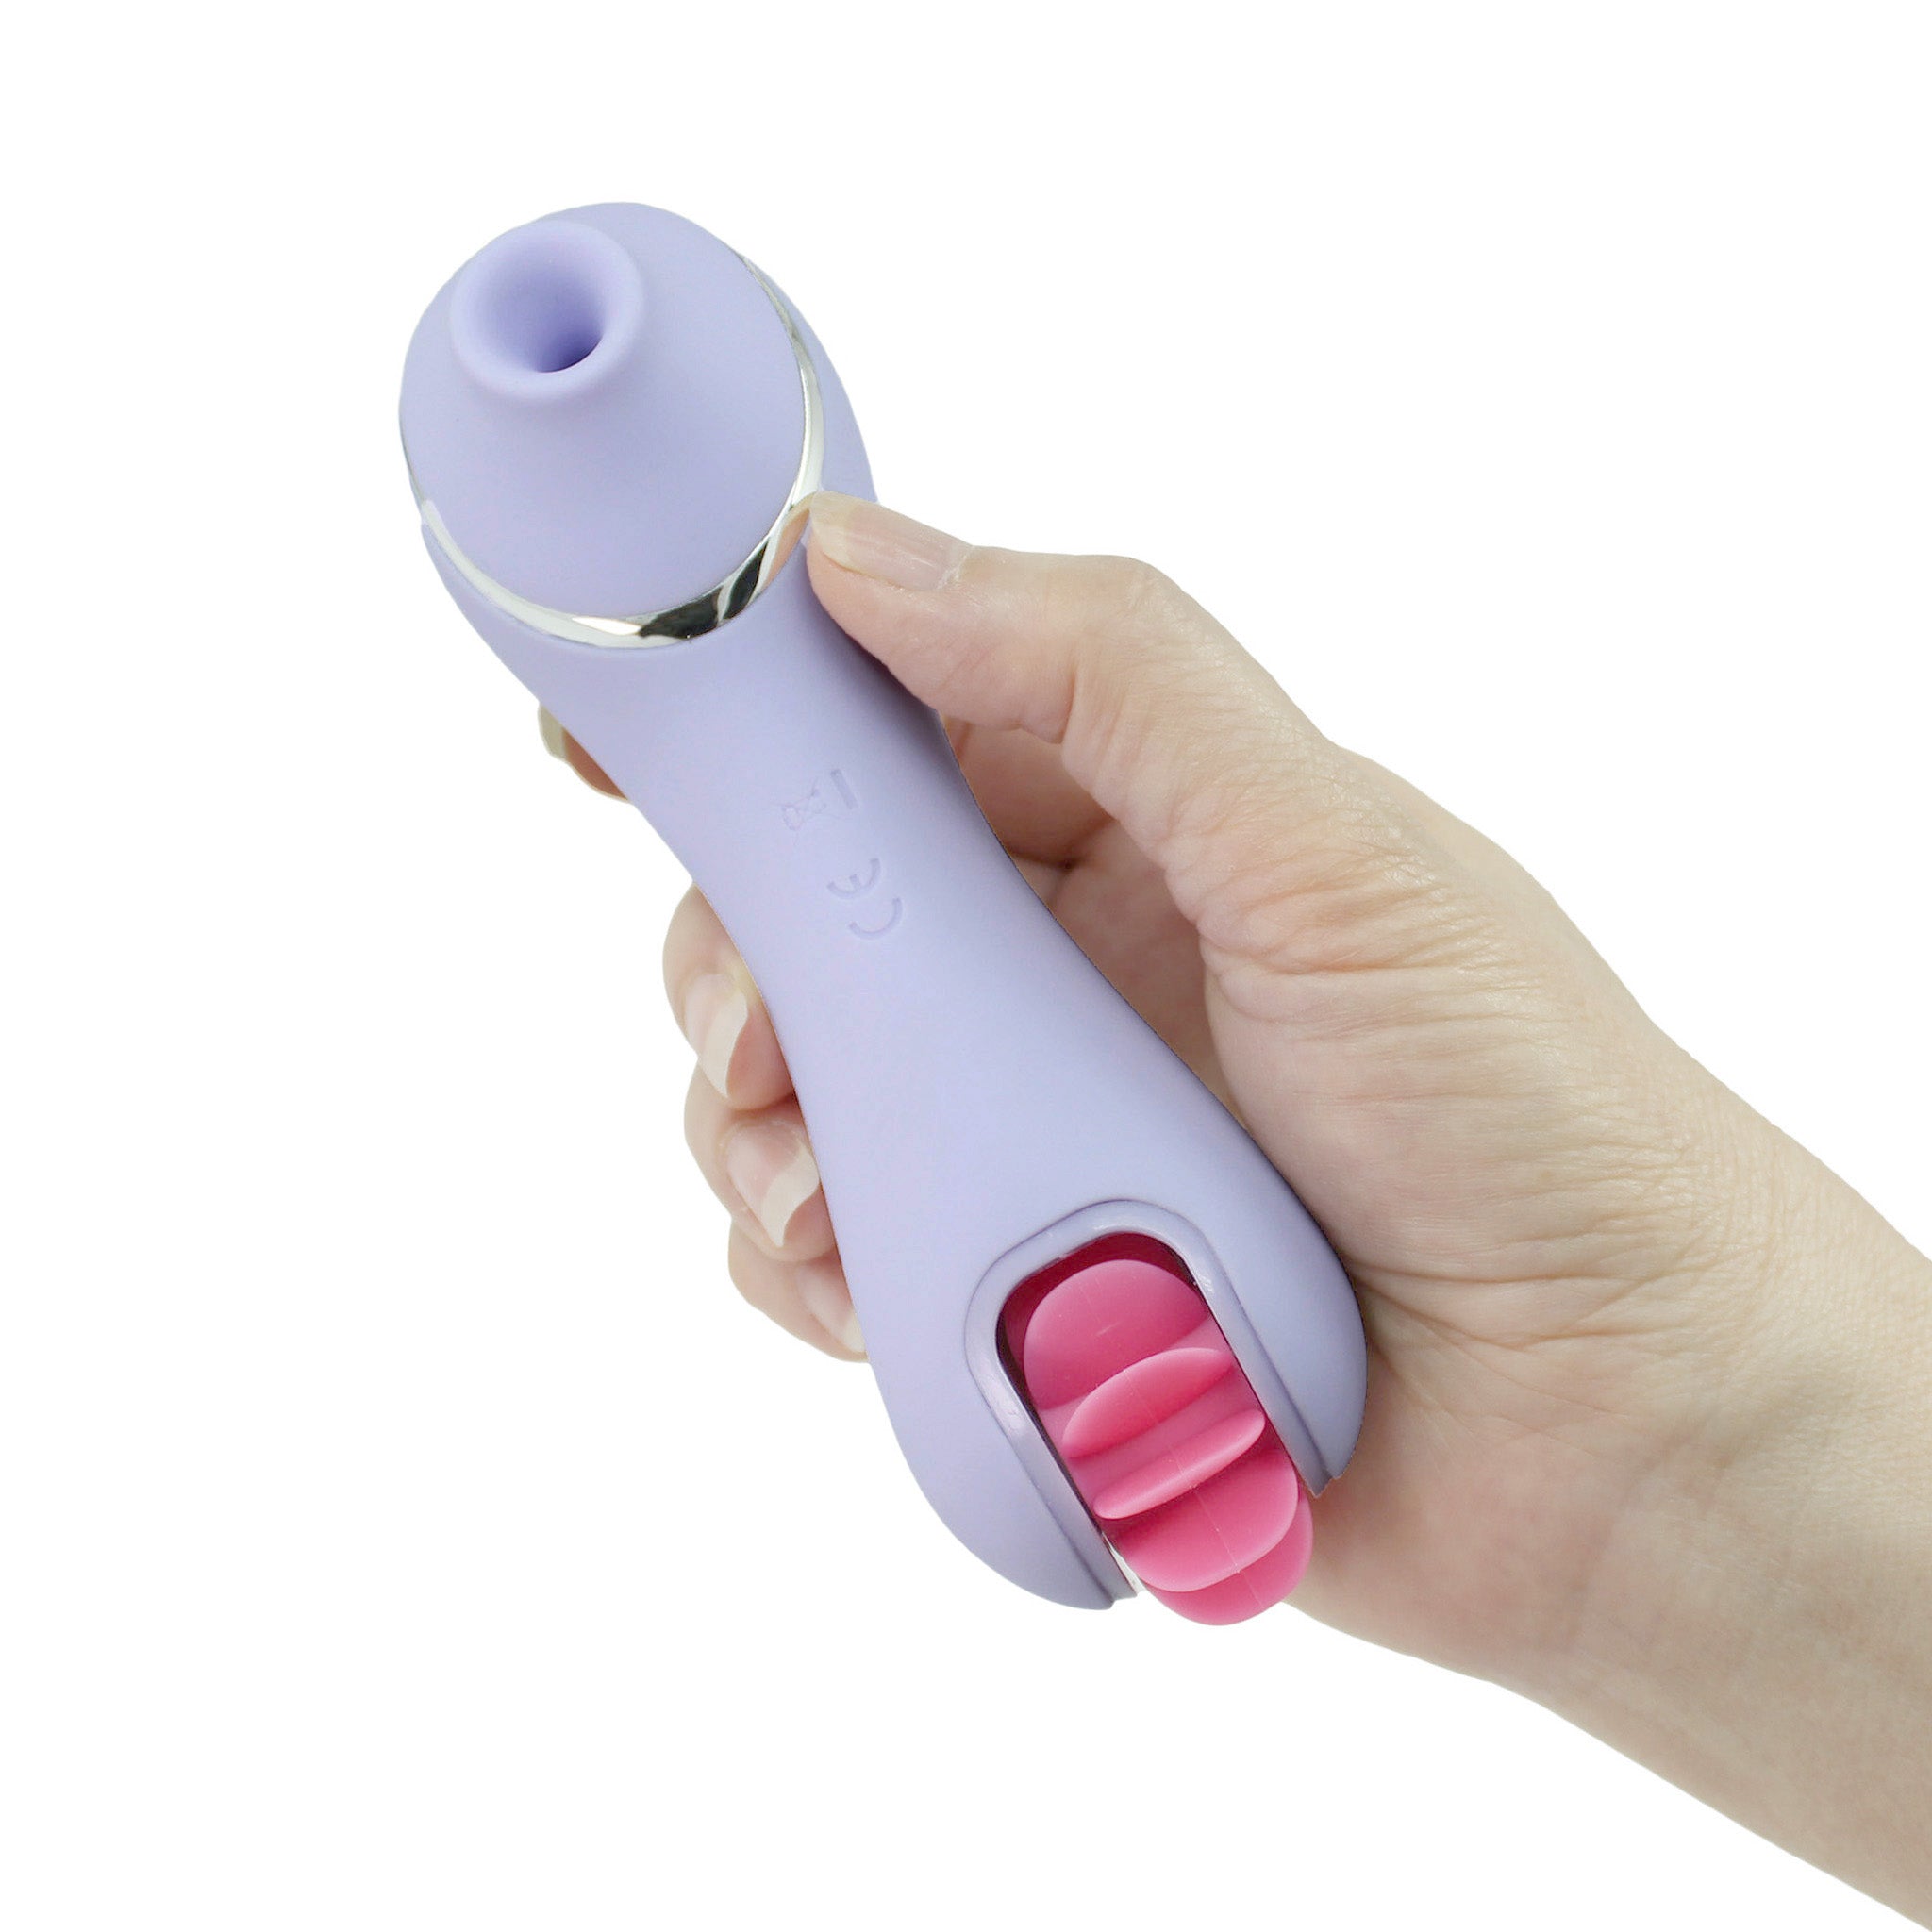 Dual Sucking Licking Vibrator Stimulator Oral Sex Toys for Women Couples